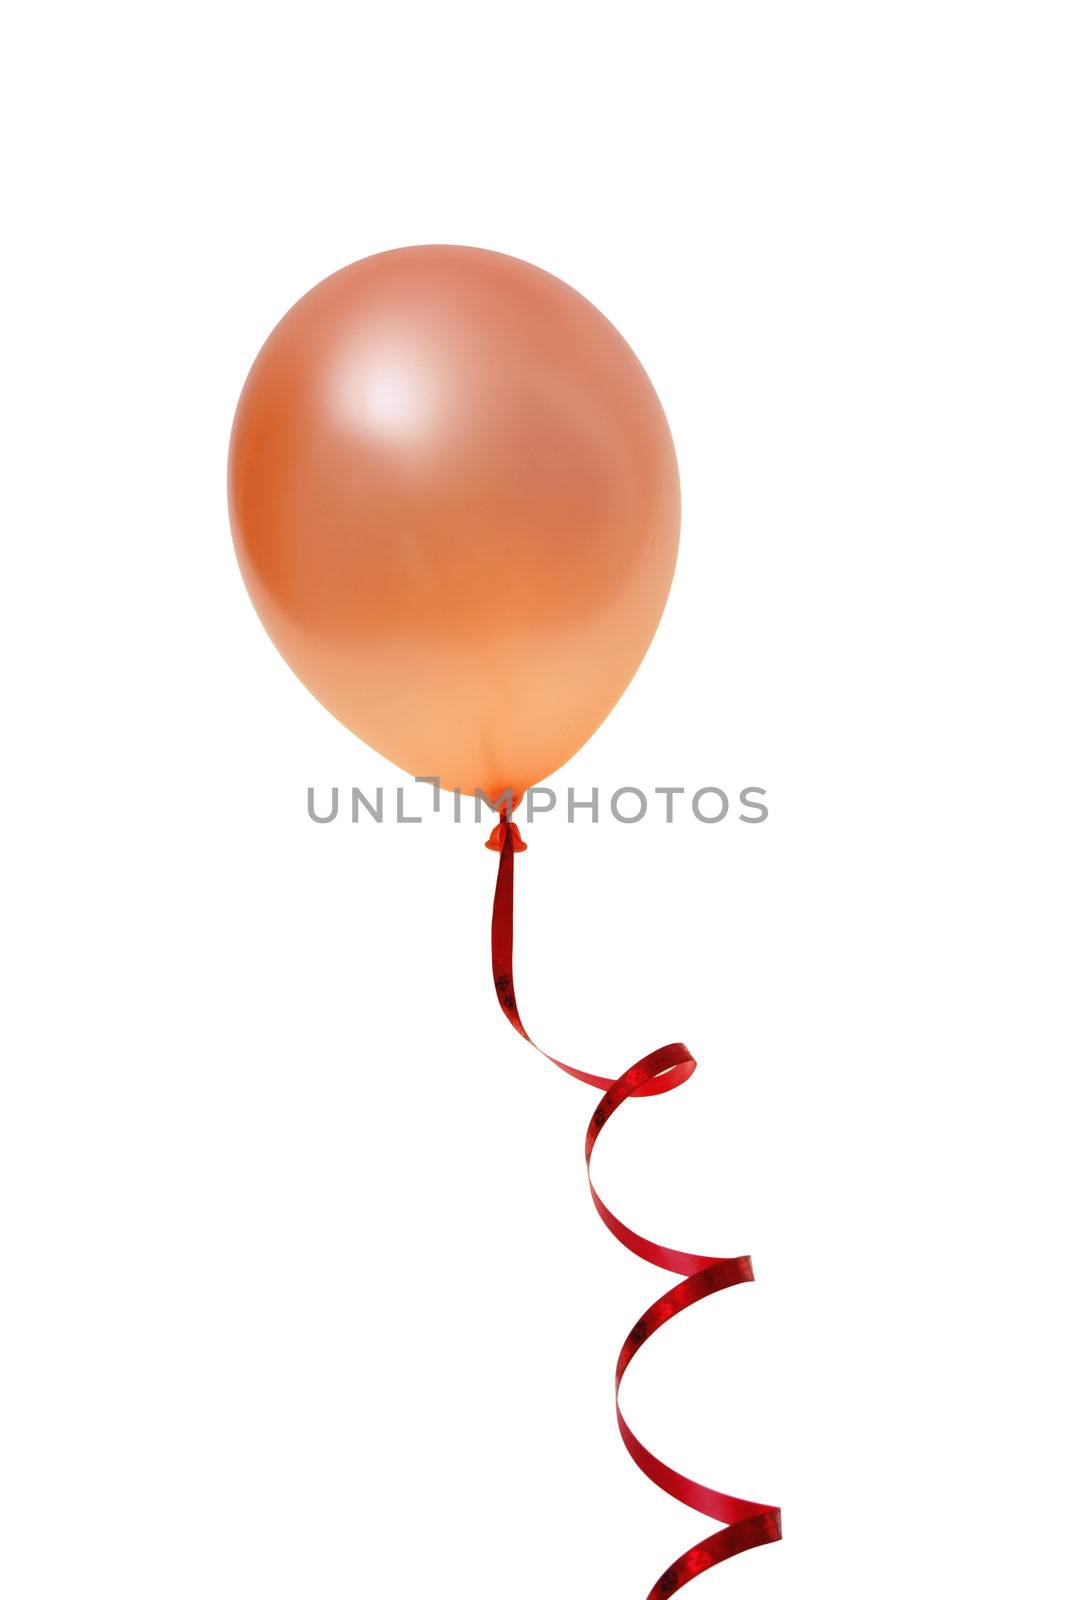 Orange  balloon with ribbon isolated on white background (with clipping path)